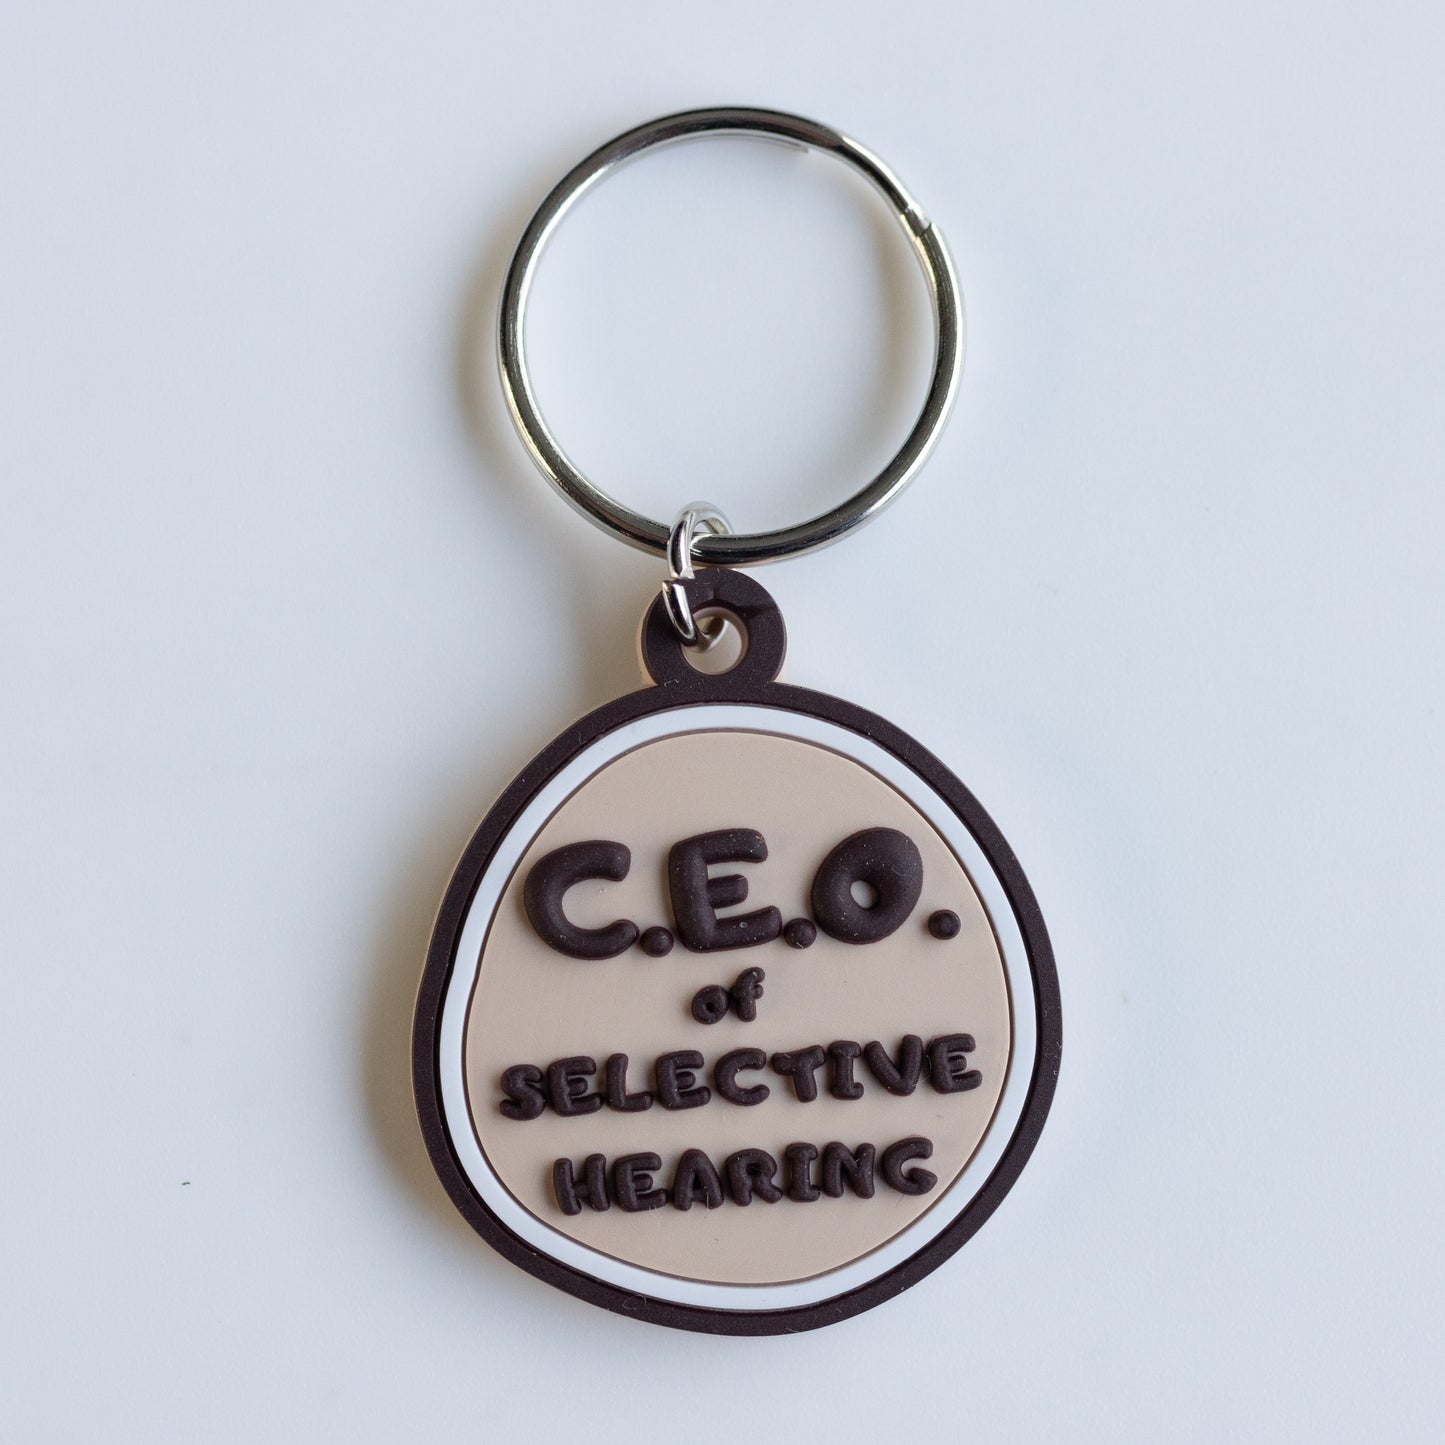 Hilarious Pet Collar Charm - CEO of Selective Listening